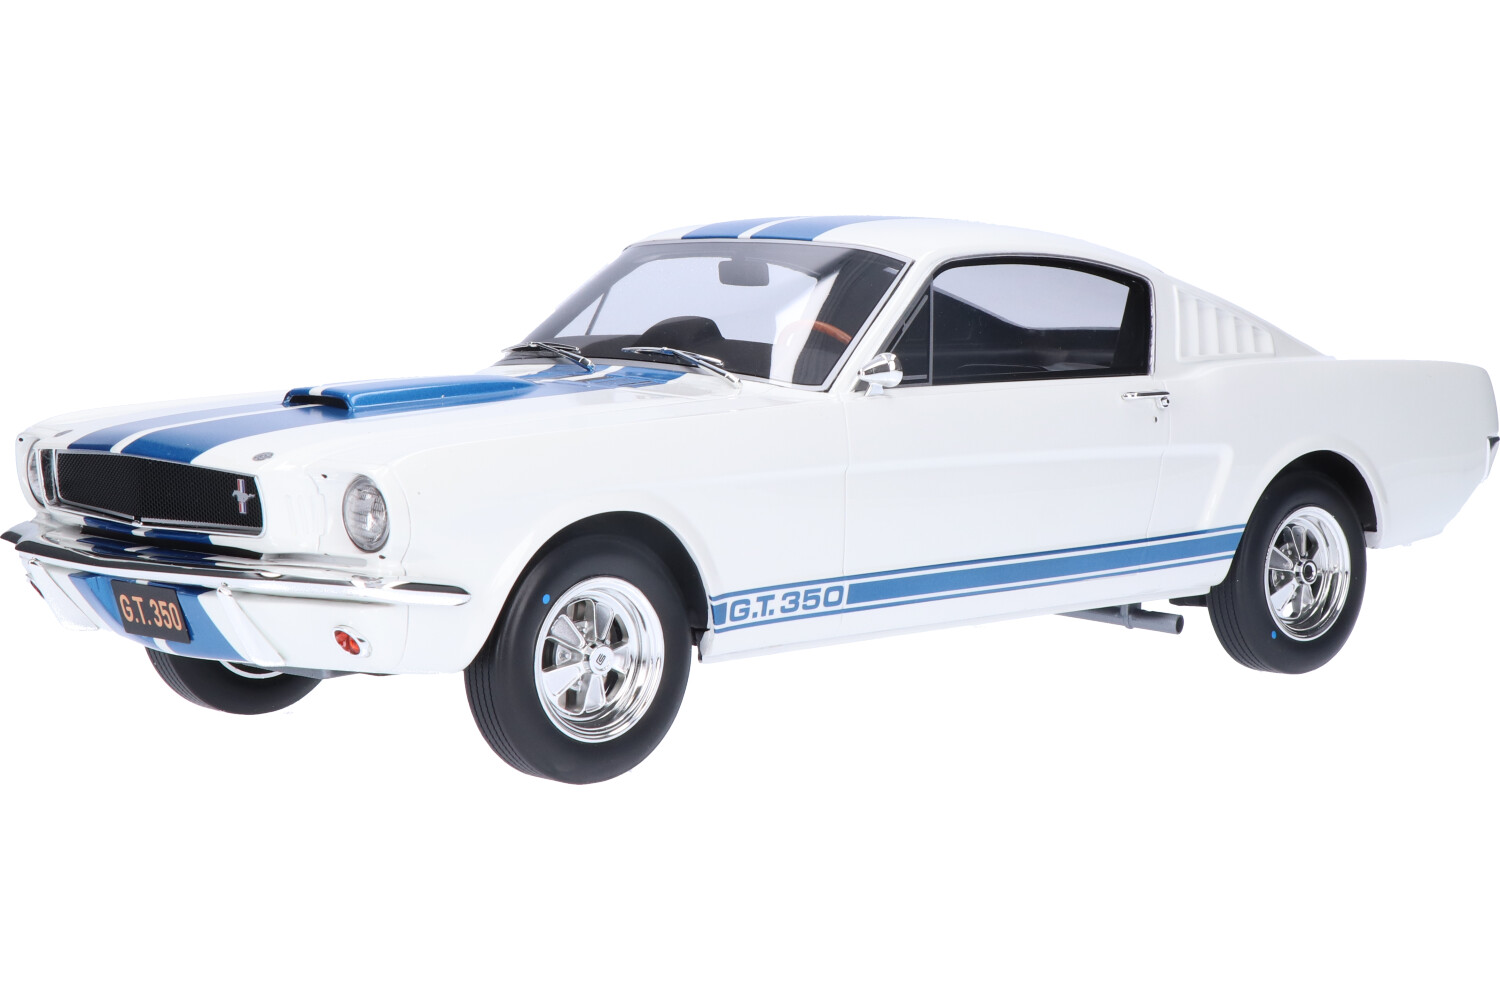 Ford Mustang Shelby GT350 Fastback - Modelauto schaal 1:12